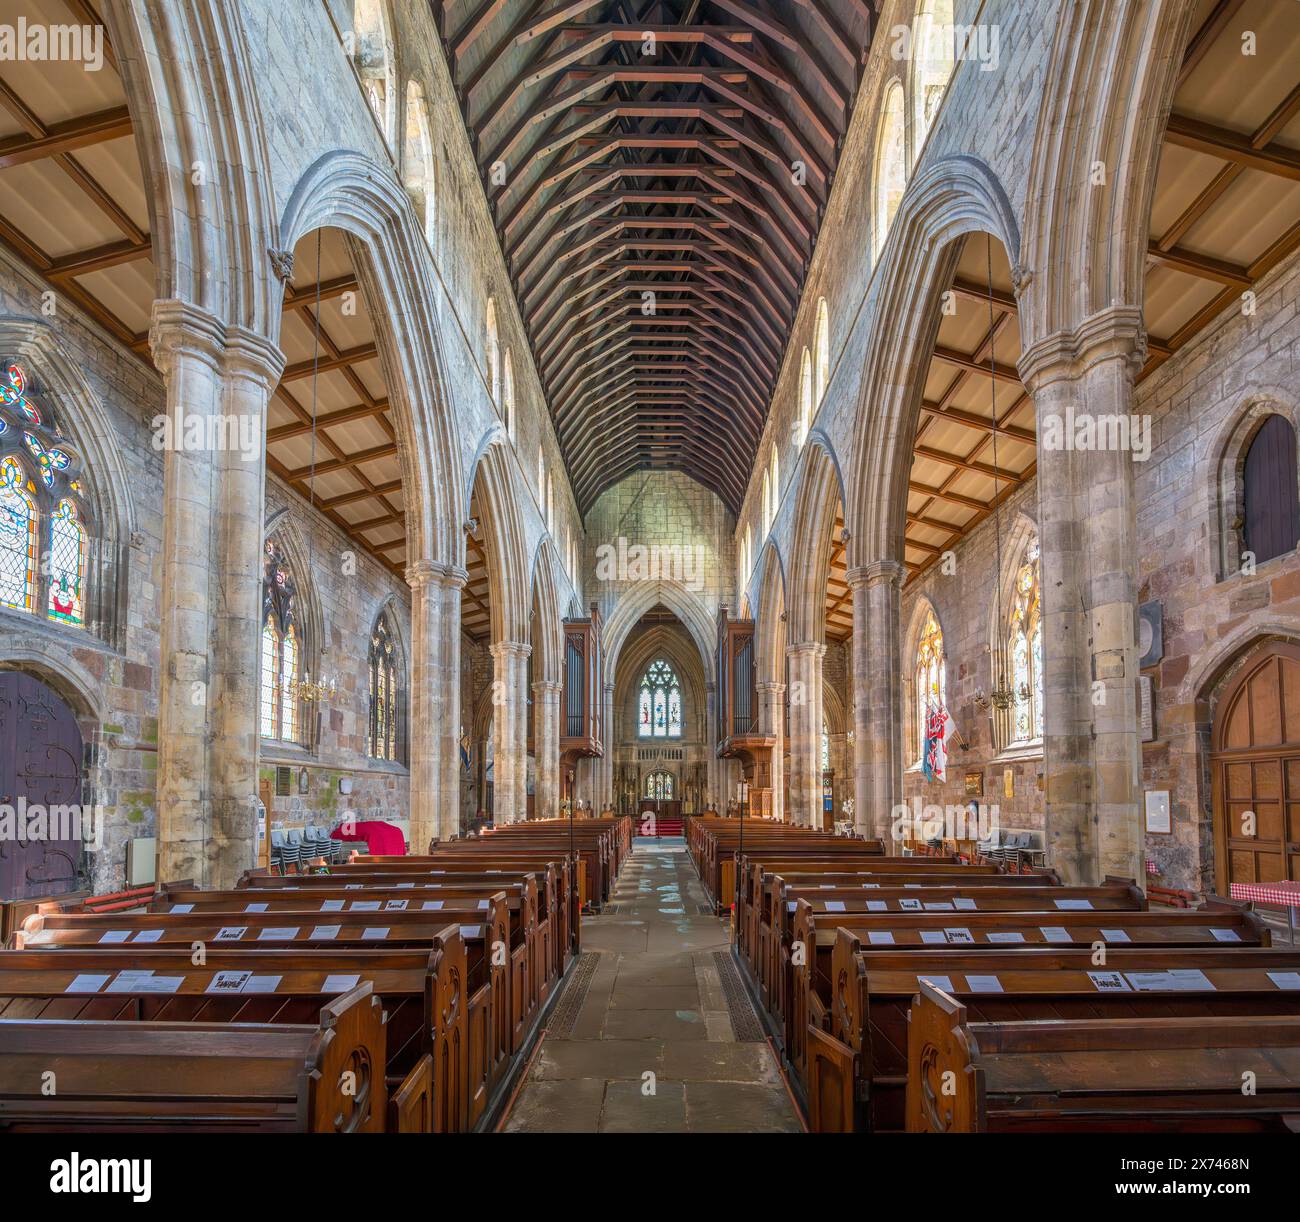 Interior of Howden Minster, Howden, Yorkshire, England, UK Stock Photo